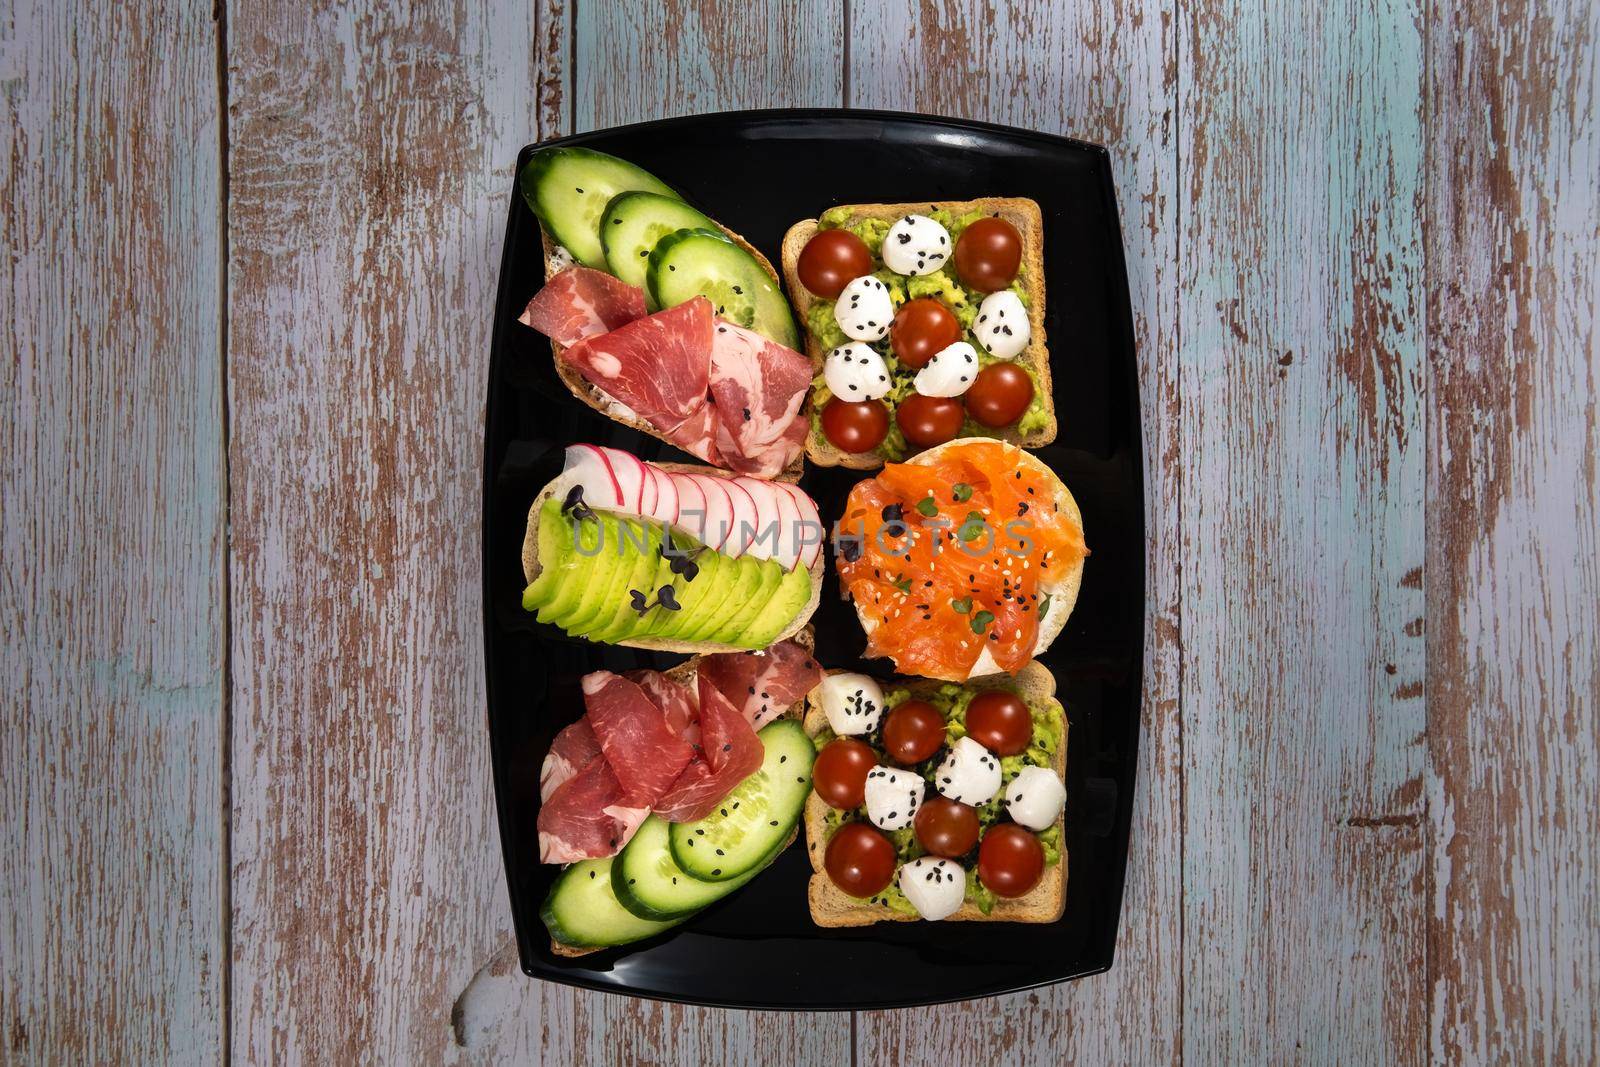 Assorted sandwiches with fish, cheese, meat and vegetables on a black plate and wooden background by Lobachad